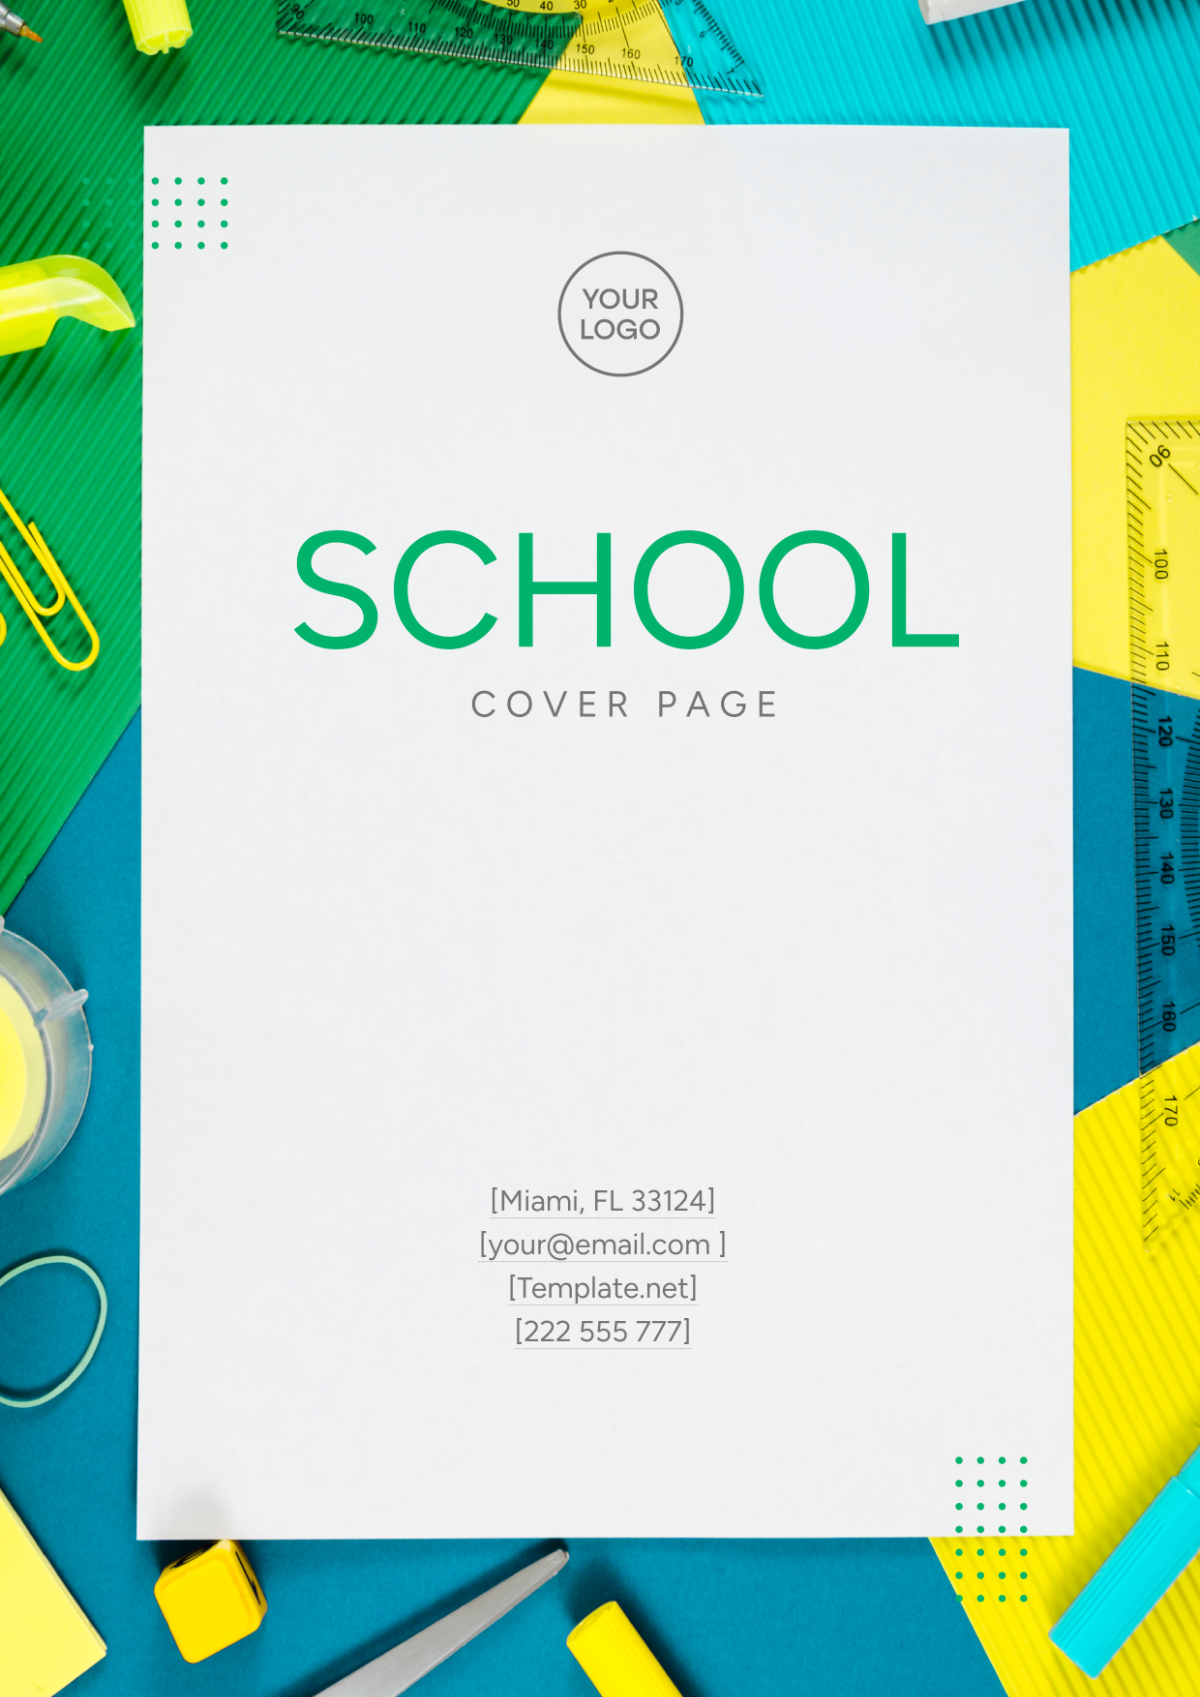 School Cover Page Image